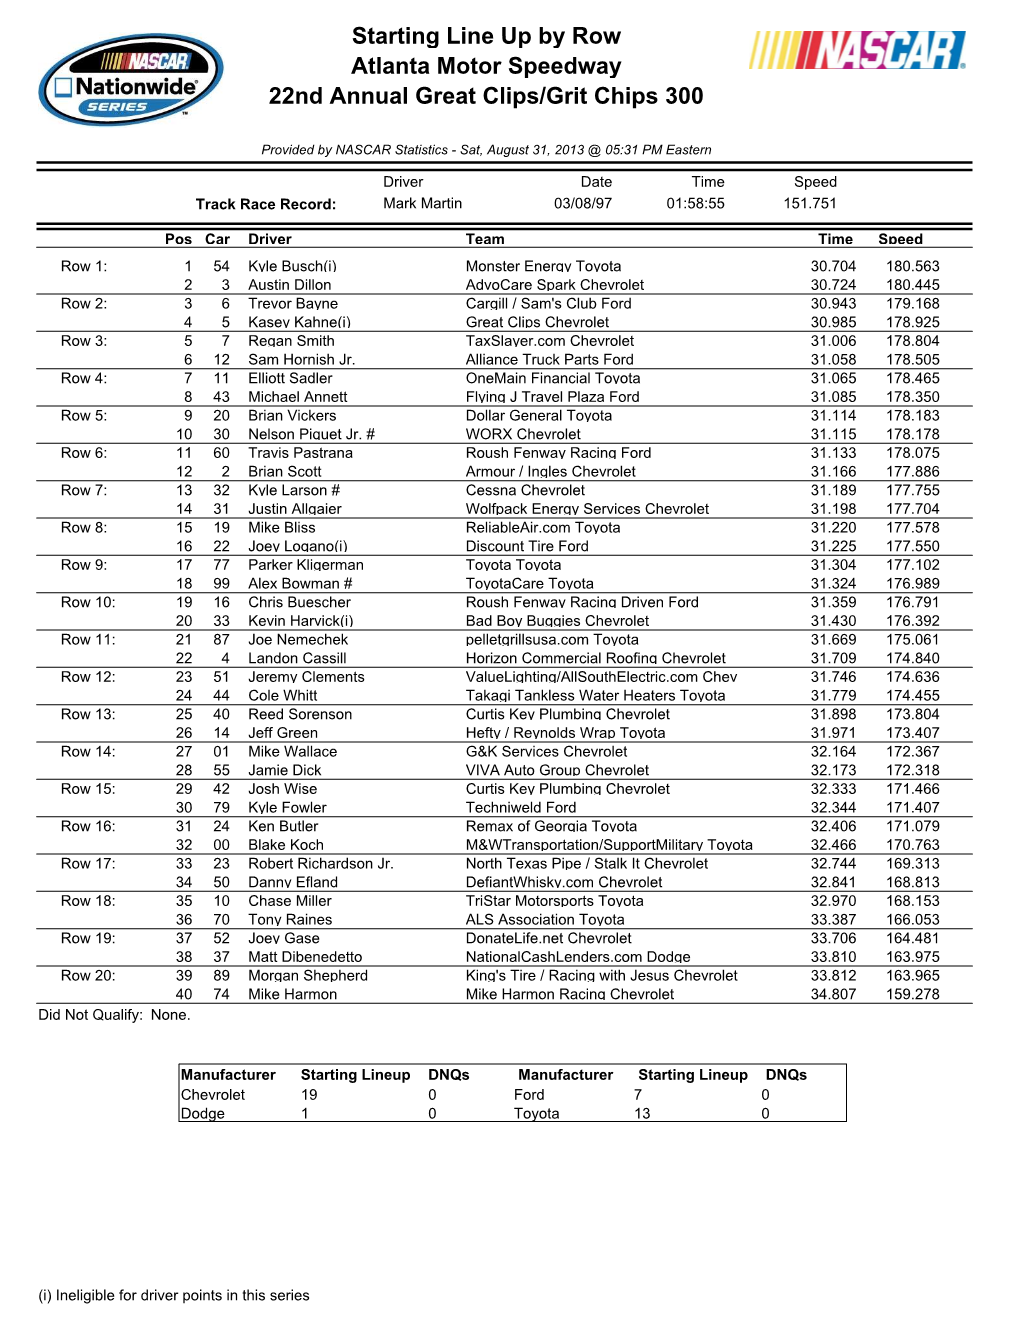 Starting Line up by Row Atlanta Motor Speedway 22Nd Annual Great Clips/Grit Chips 300